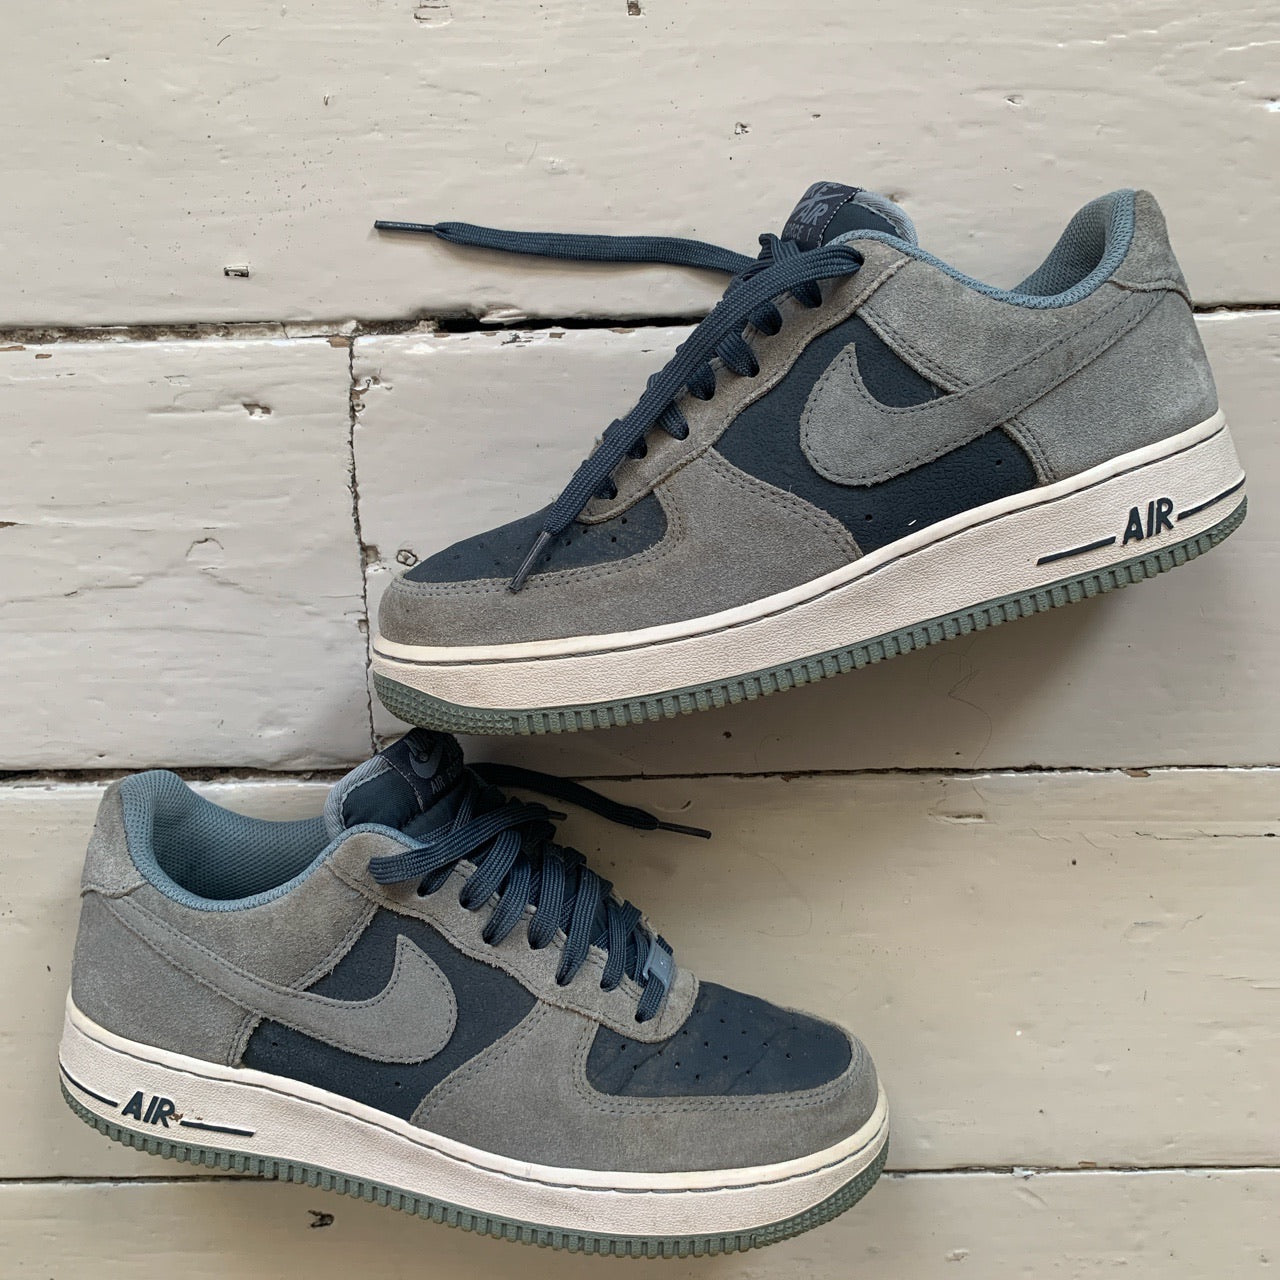 Nike Air Force 1 Suede Grey and Blue (UK 7)